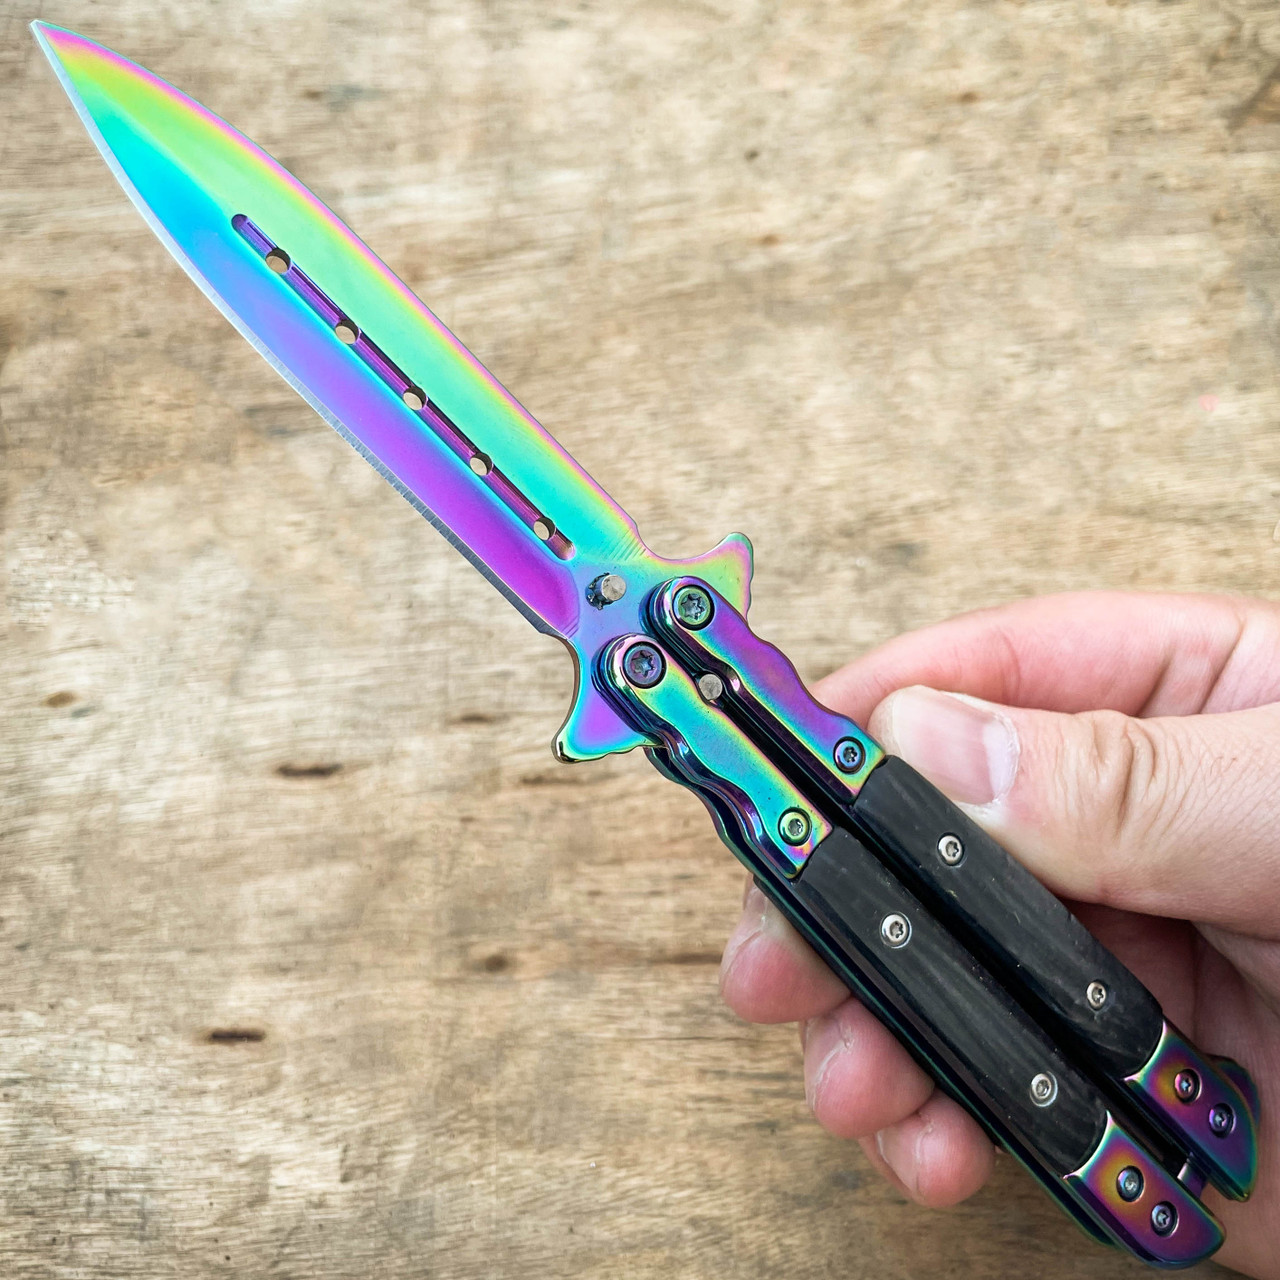 Balisong: What Is a Butterfly Knife? - The Armory Life